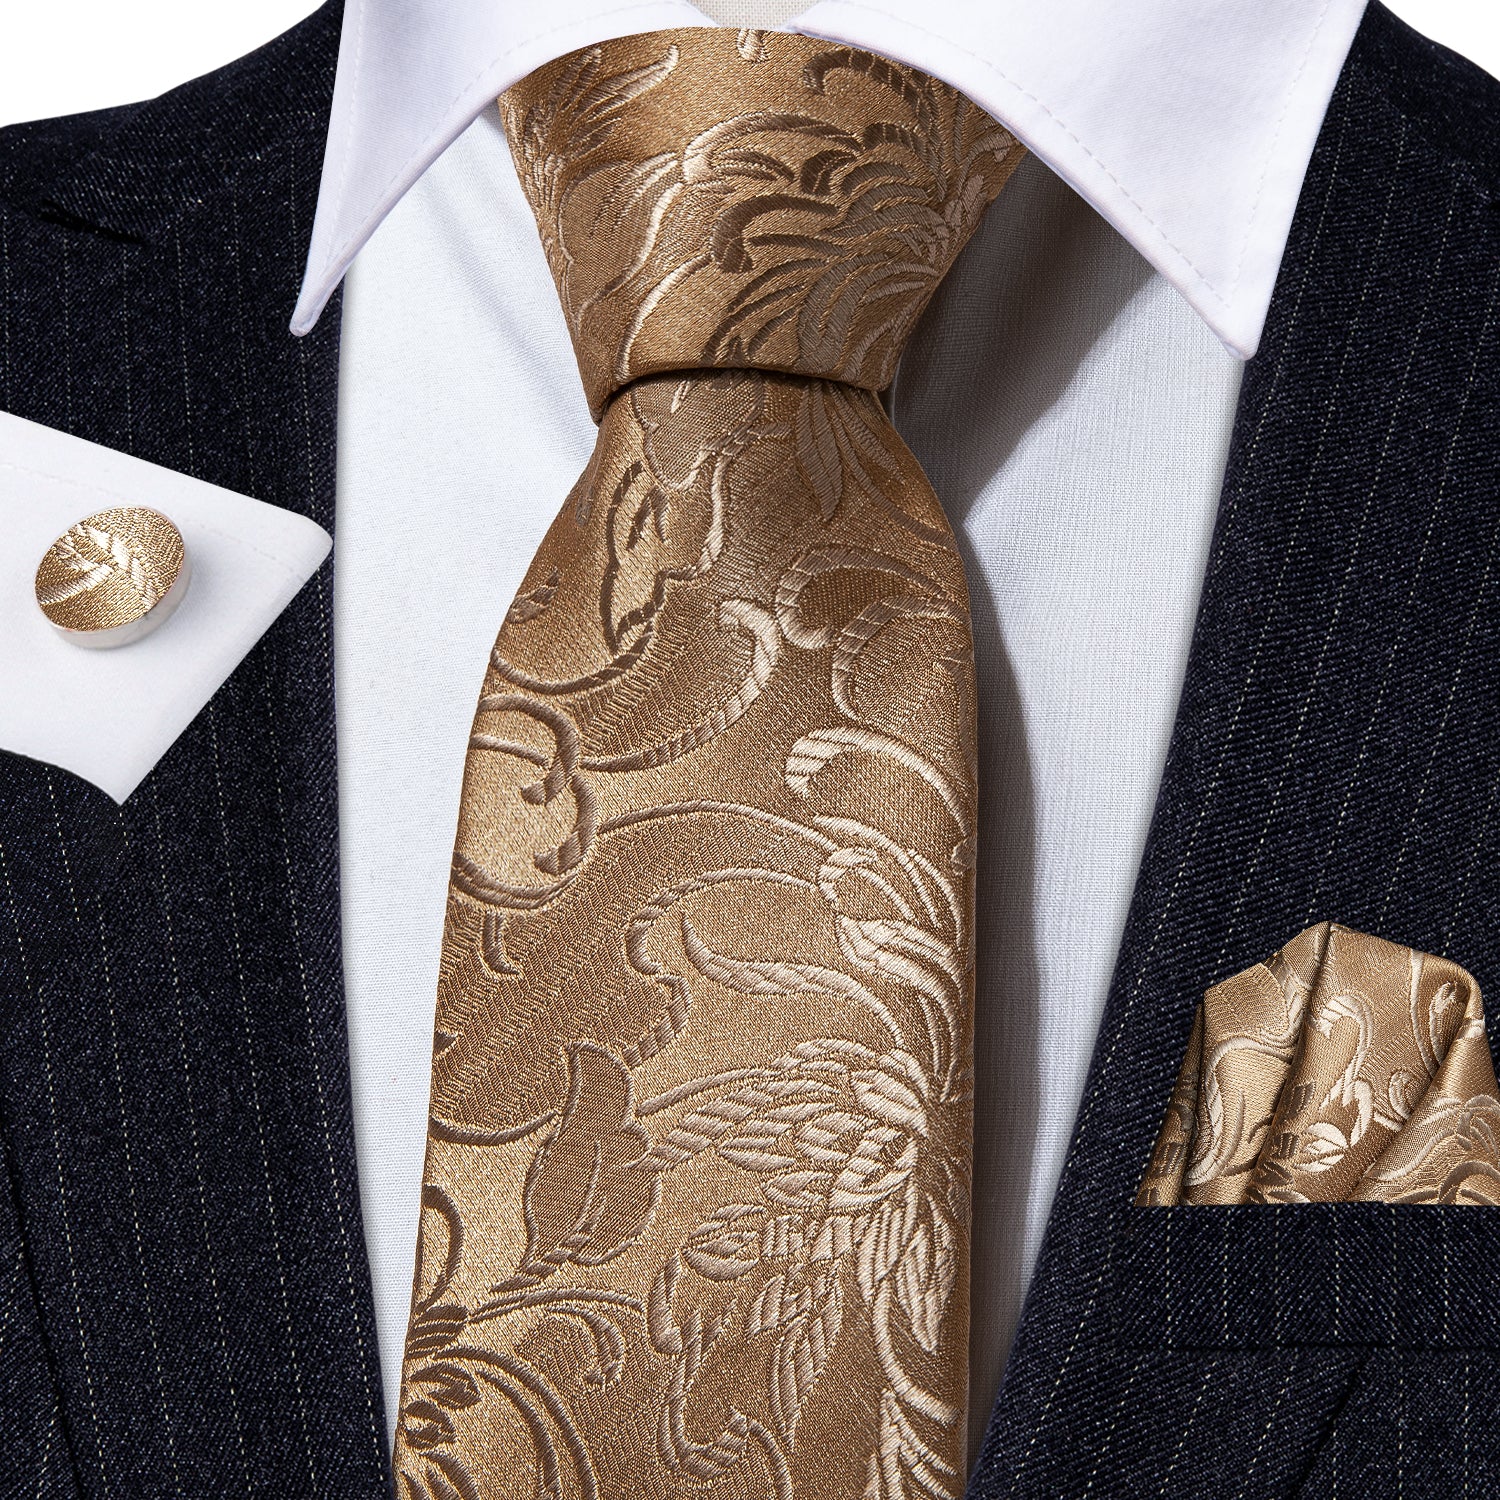 Barry.wang Champagne Tie Gold Floral Tie Pocket Square Cufflinks Set